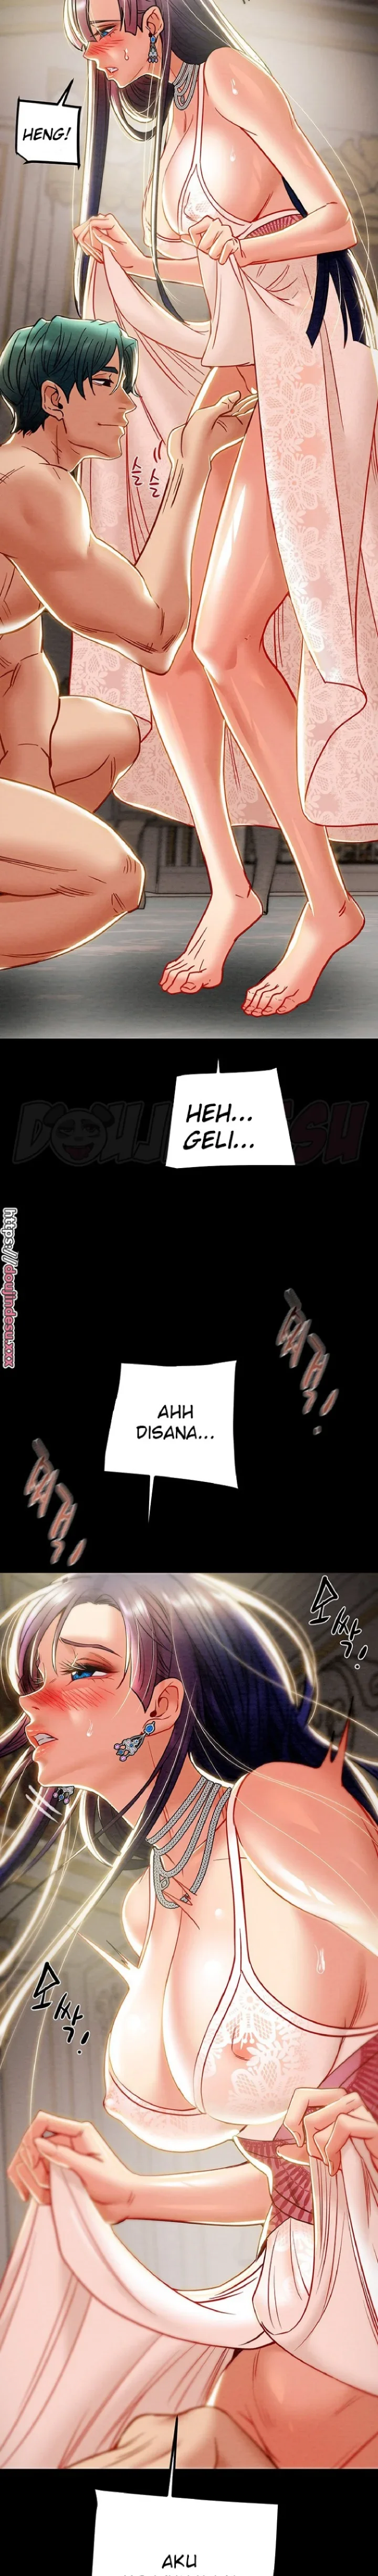 where-is-my-hammer-raw-chap-42-11